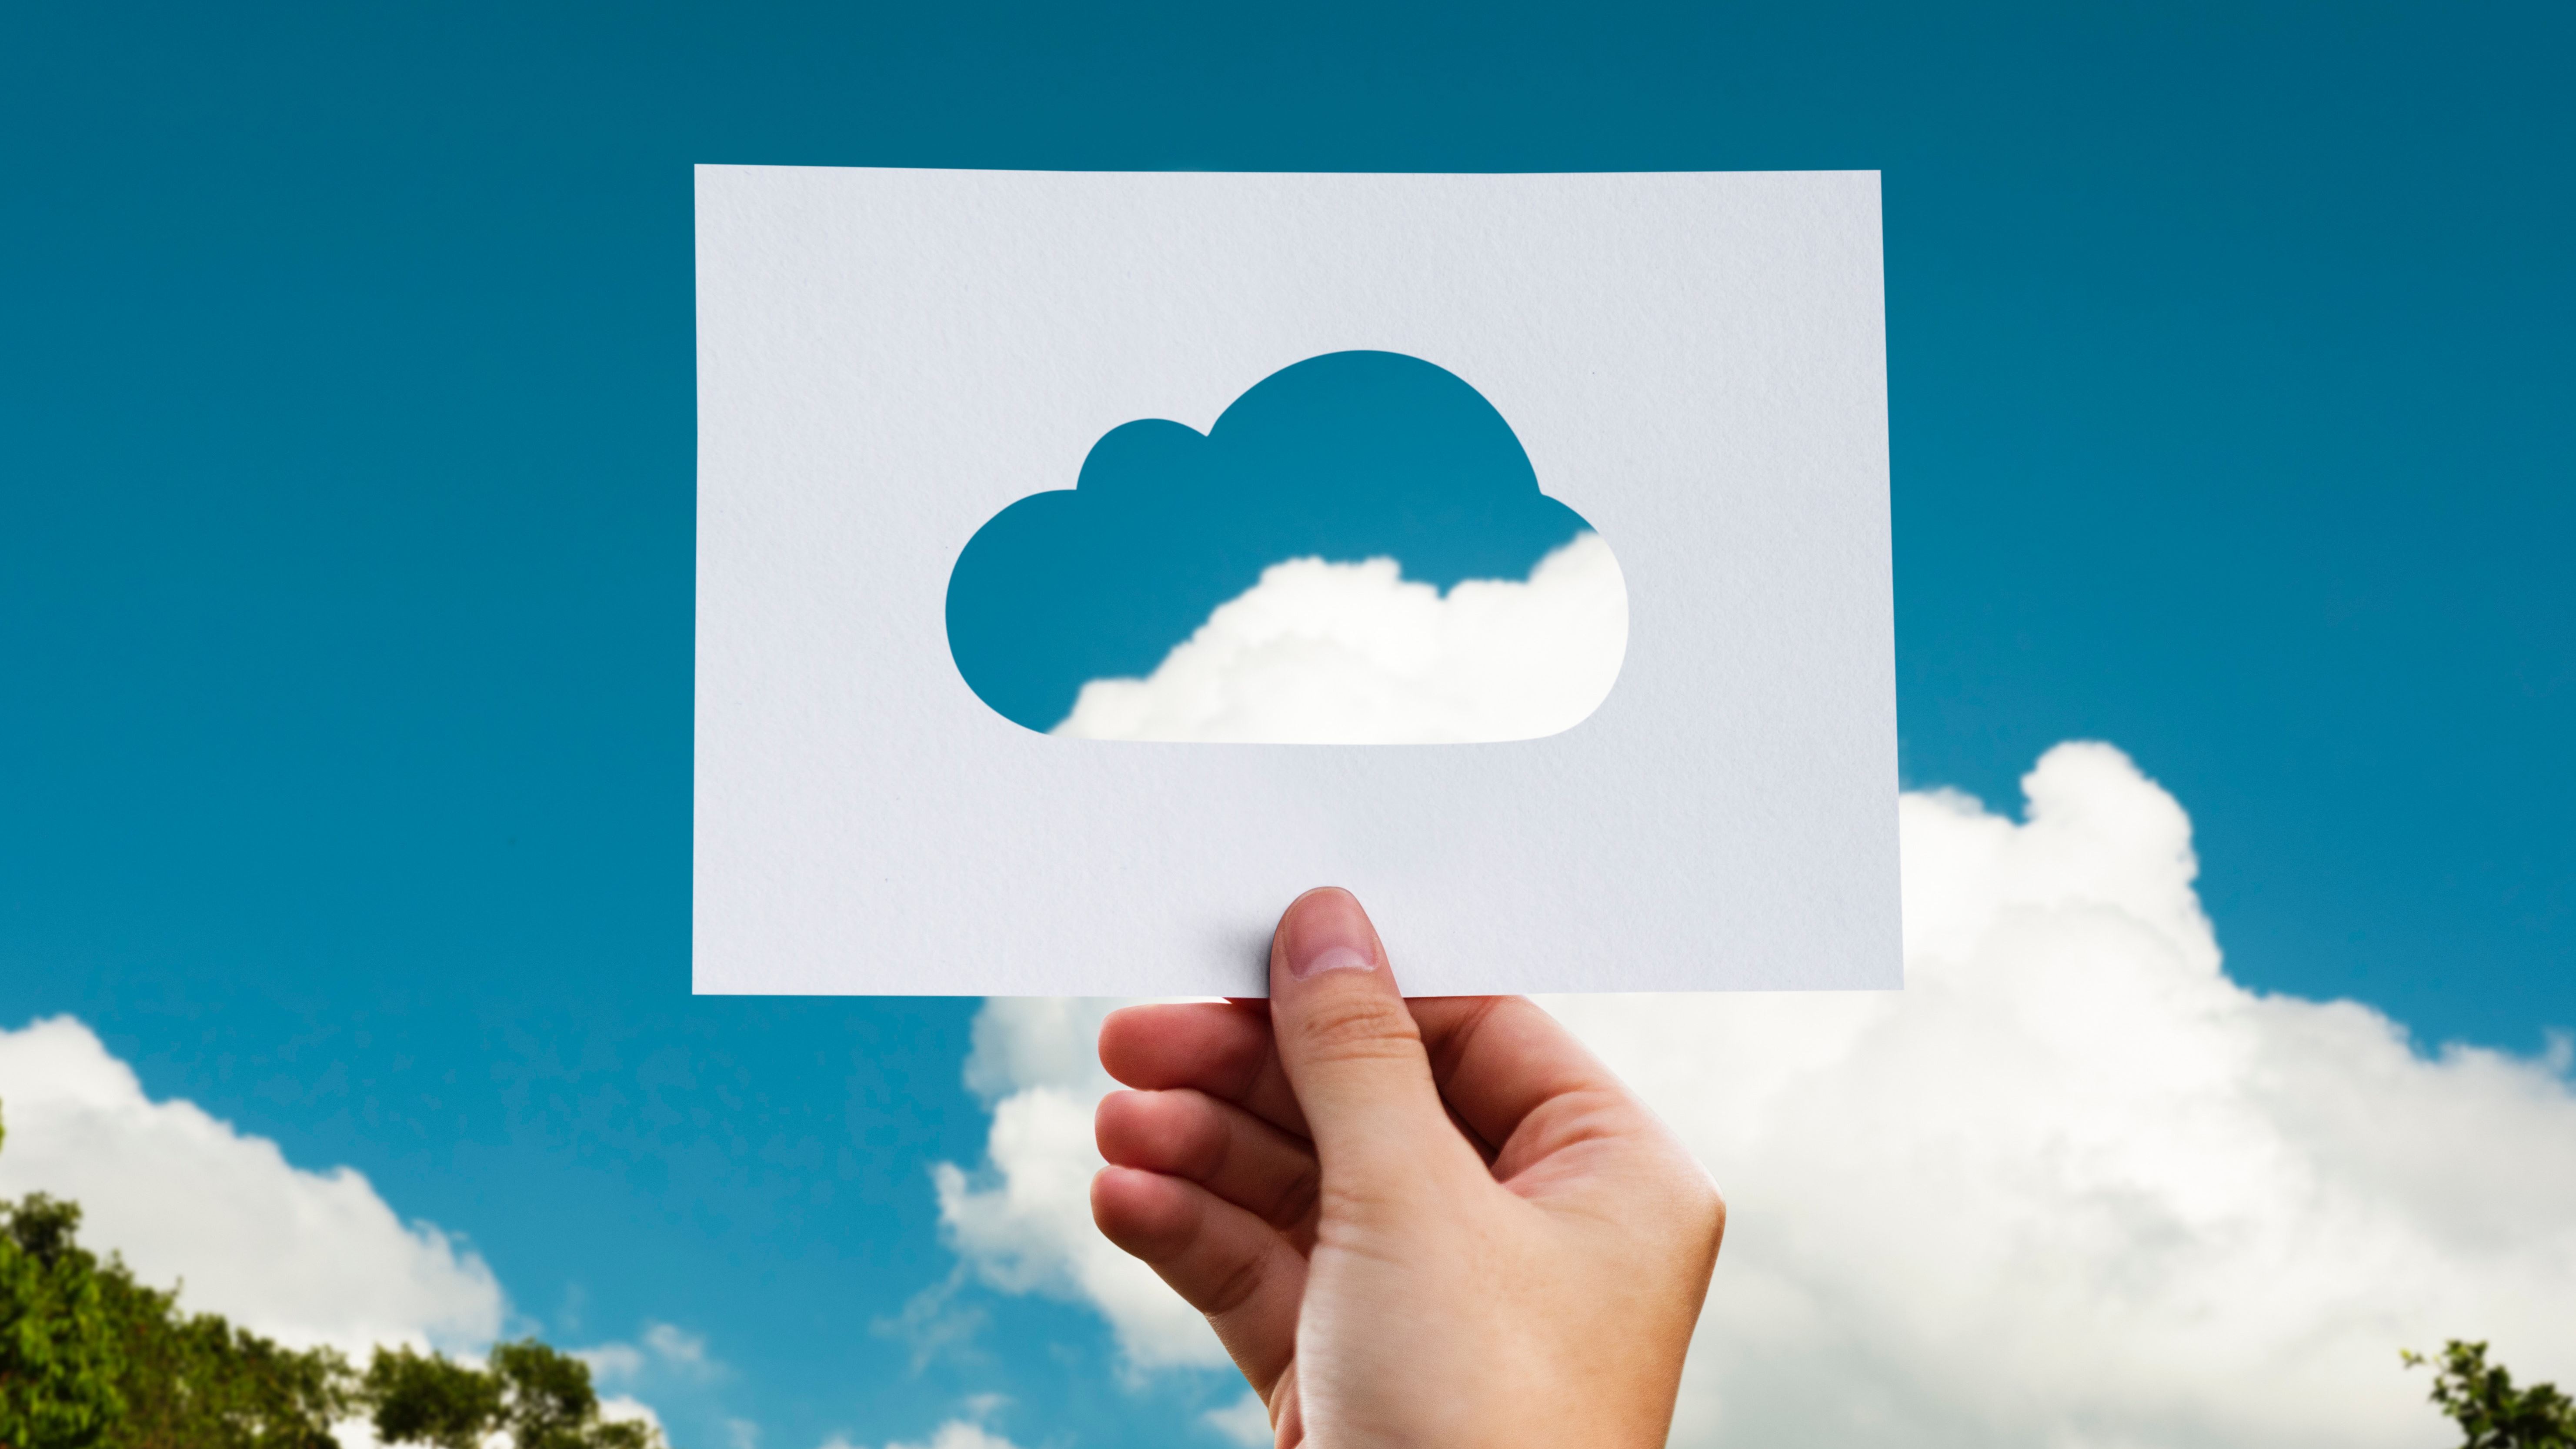 An R&D tax credit advisor holding a cut out image of a cloud against a blue sky